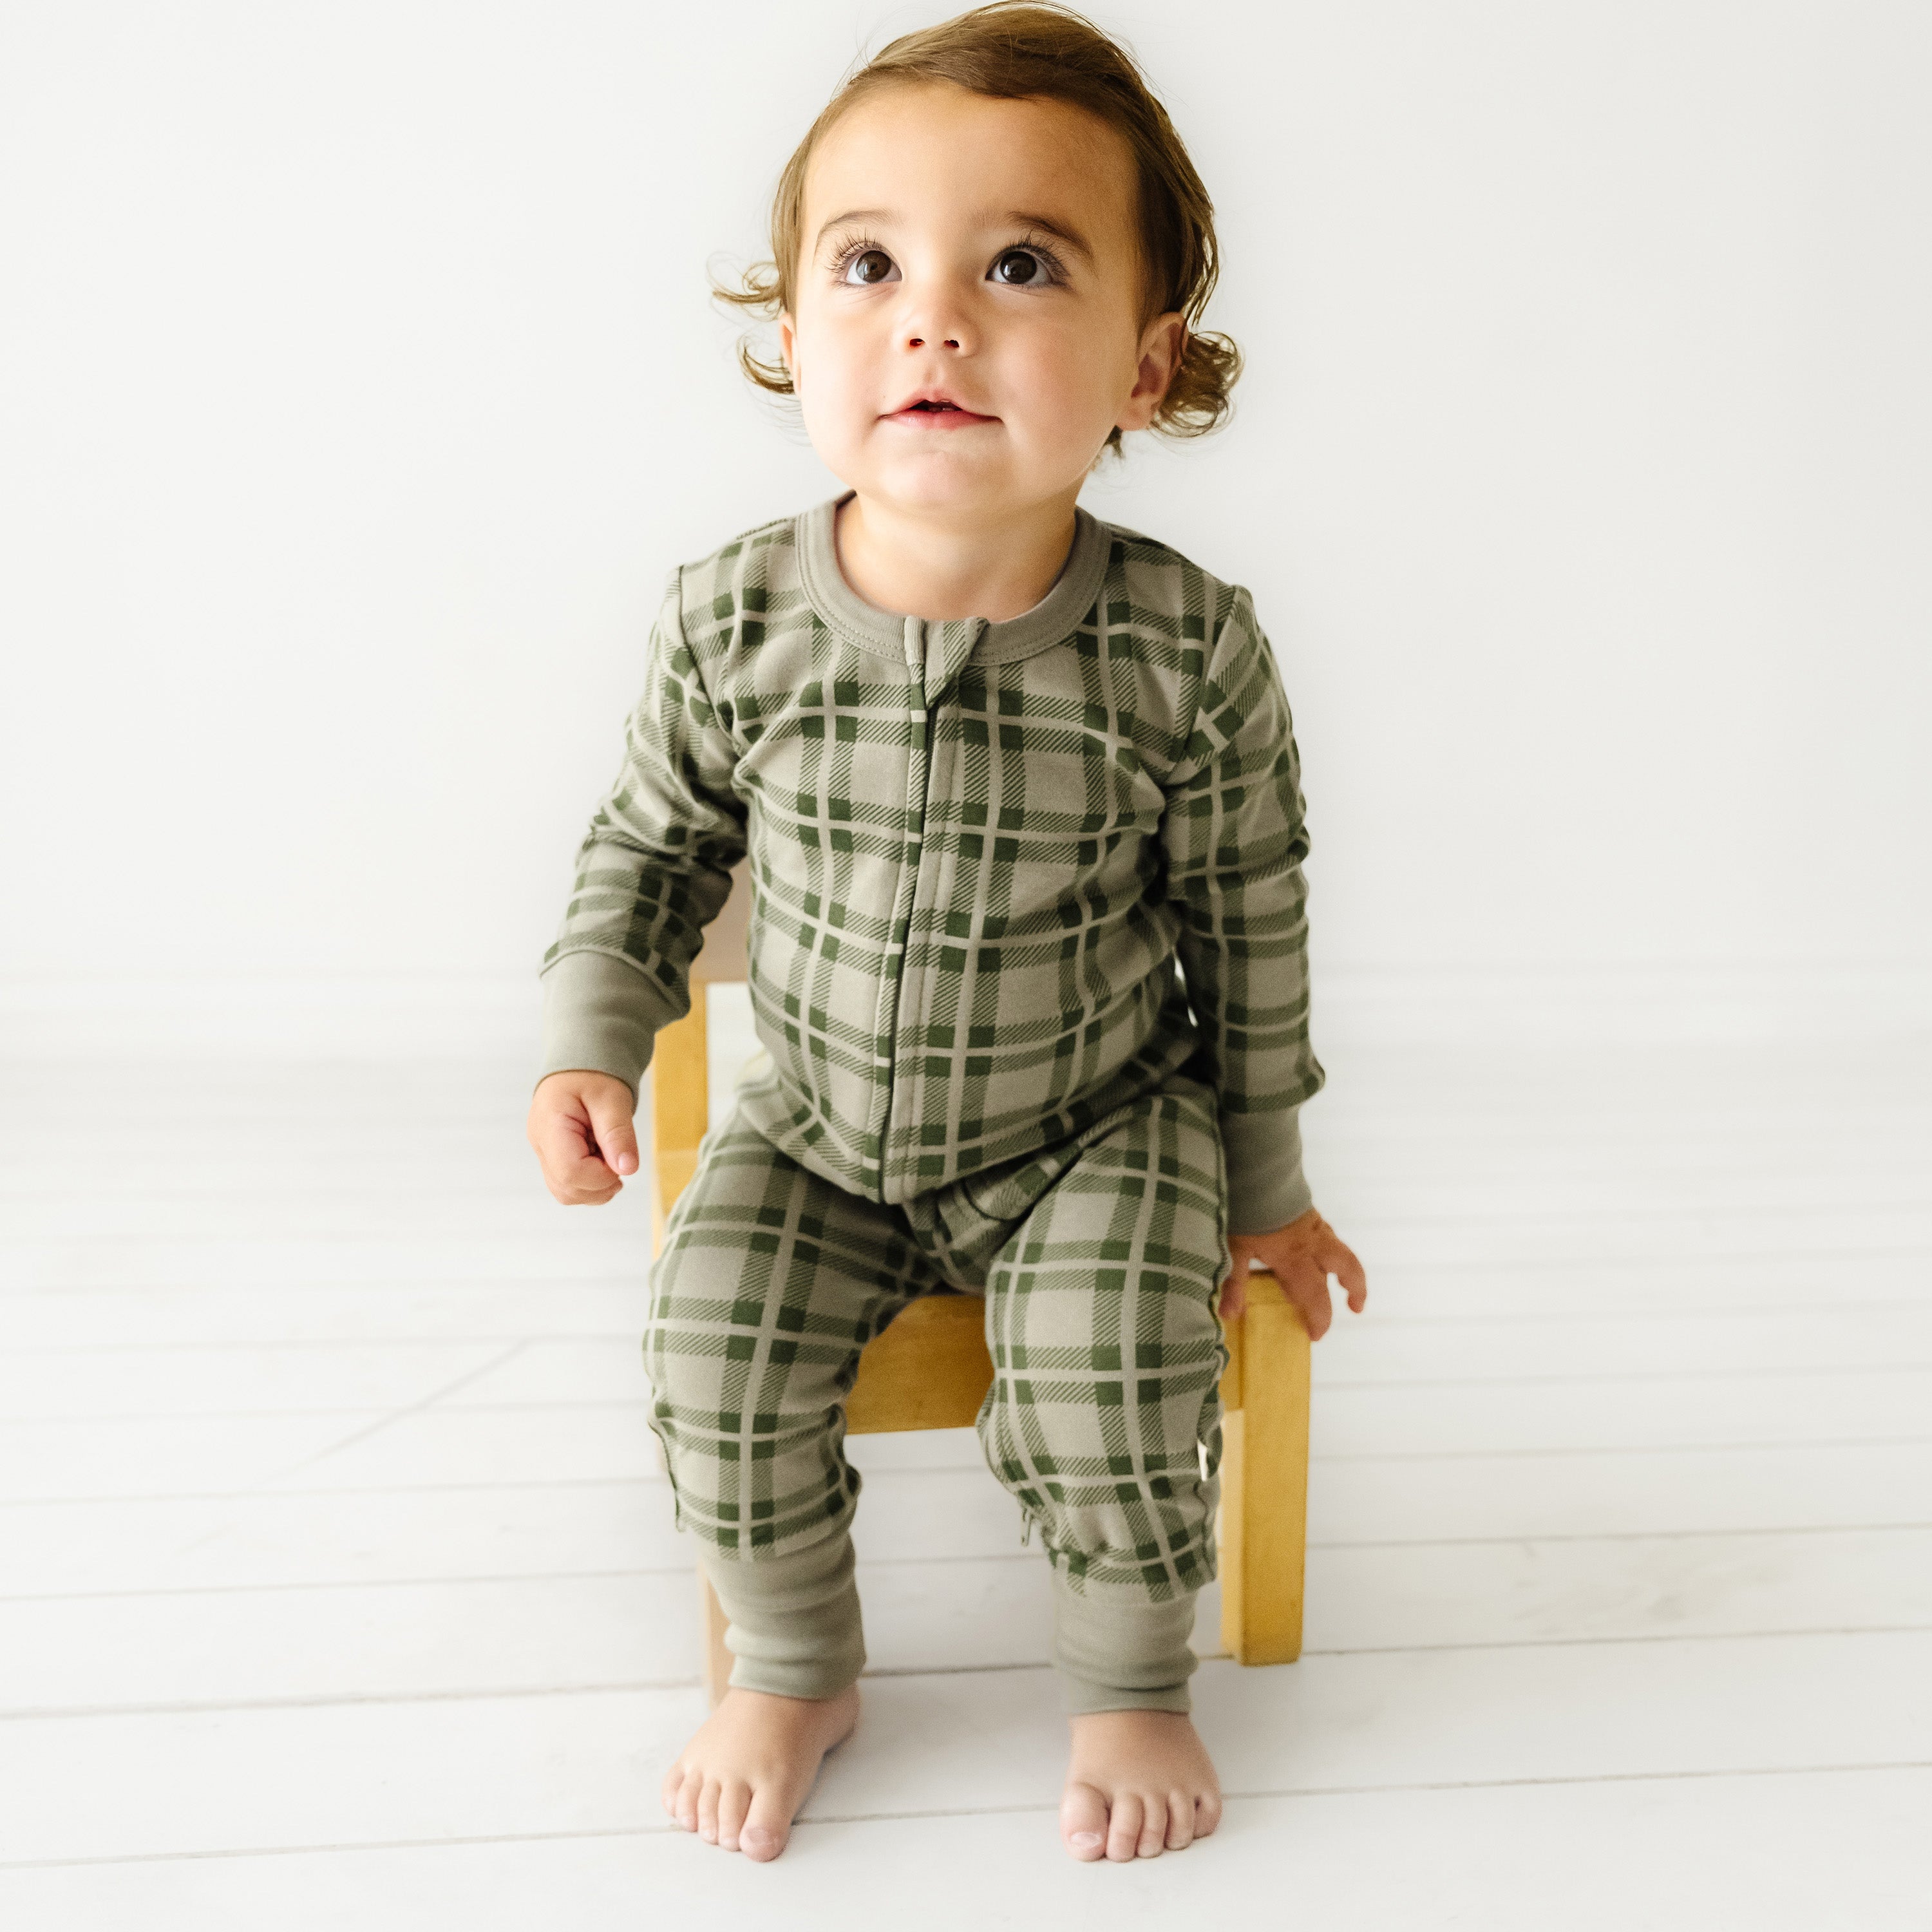 A toddler with curly hair wearing an Organic Baby Organic 2-Way Zip Romper - Plaid sits on a small wooden stool in a bright room.